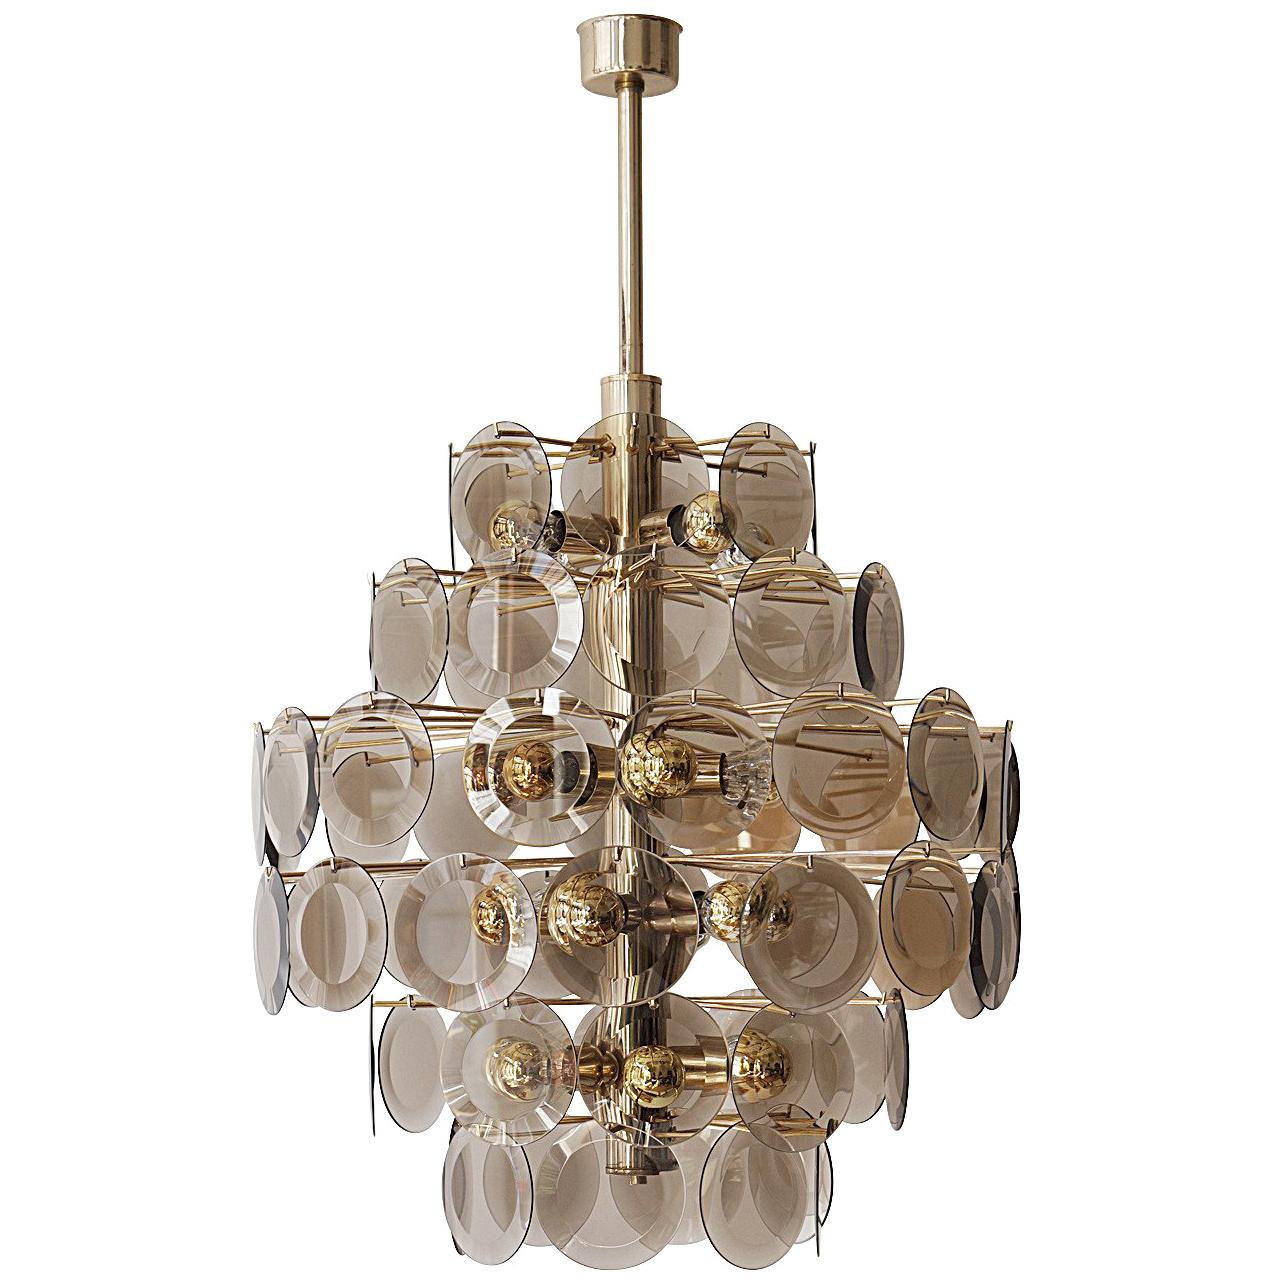 Large Italian Murano glass chandelier with 71 glass discs.
24 E27 Bulbs.
Total height with suspension bar 122 cm.
Height fixture with glasses is 80 cm.